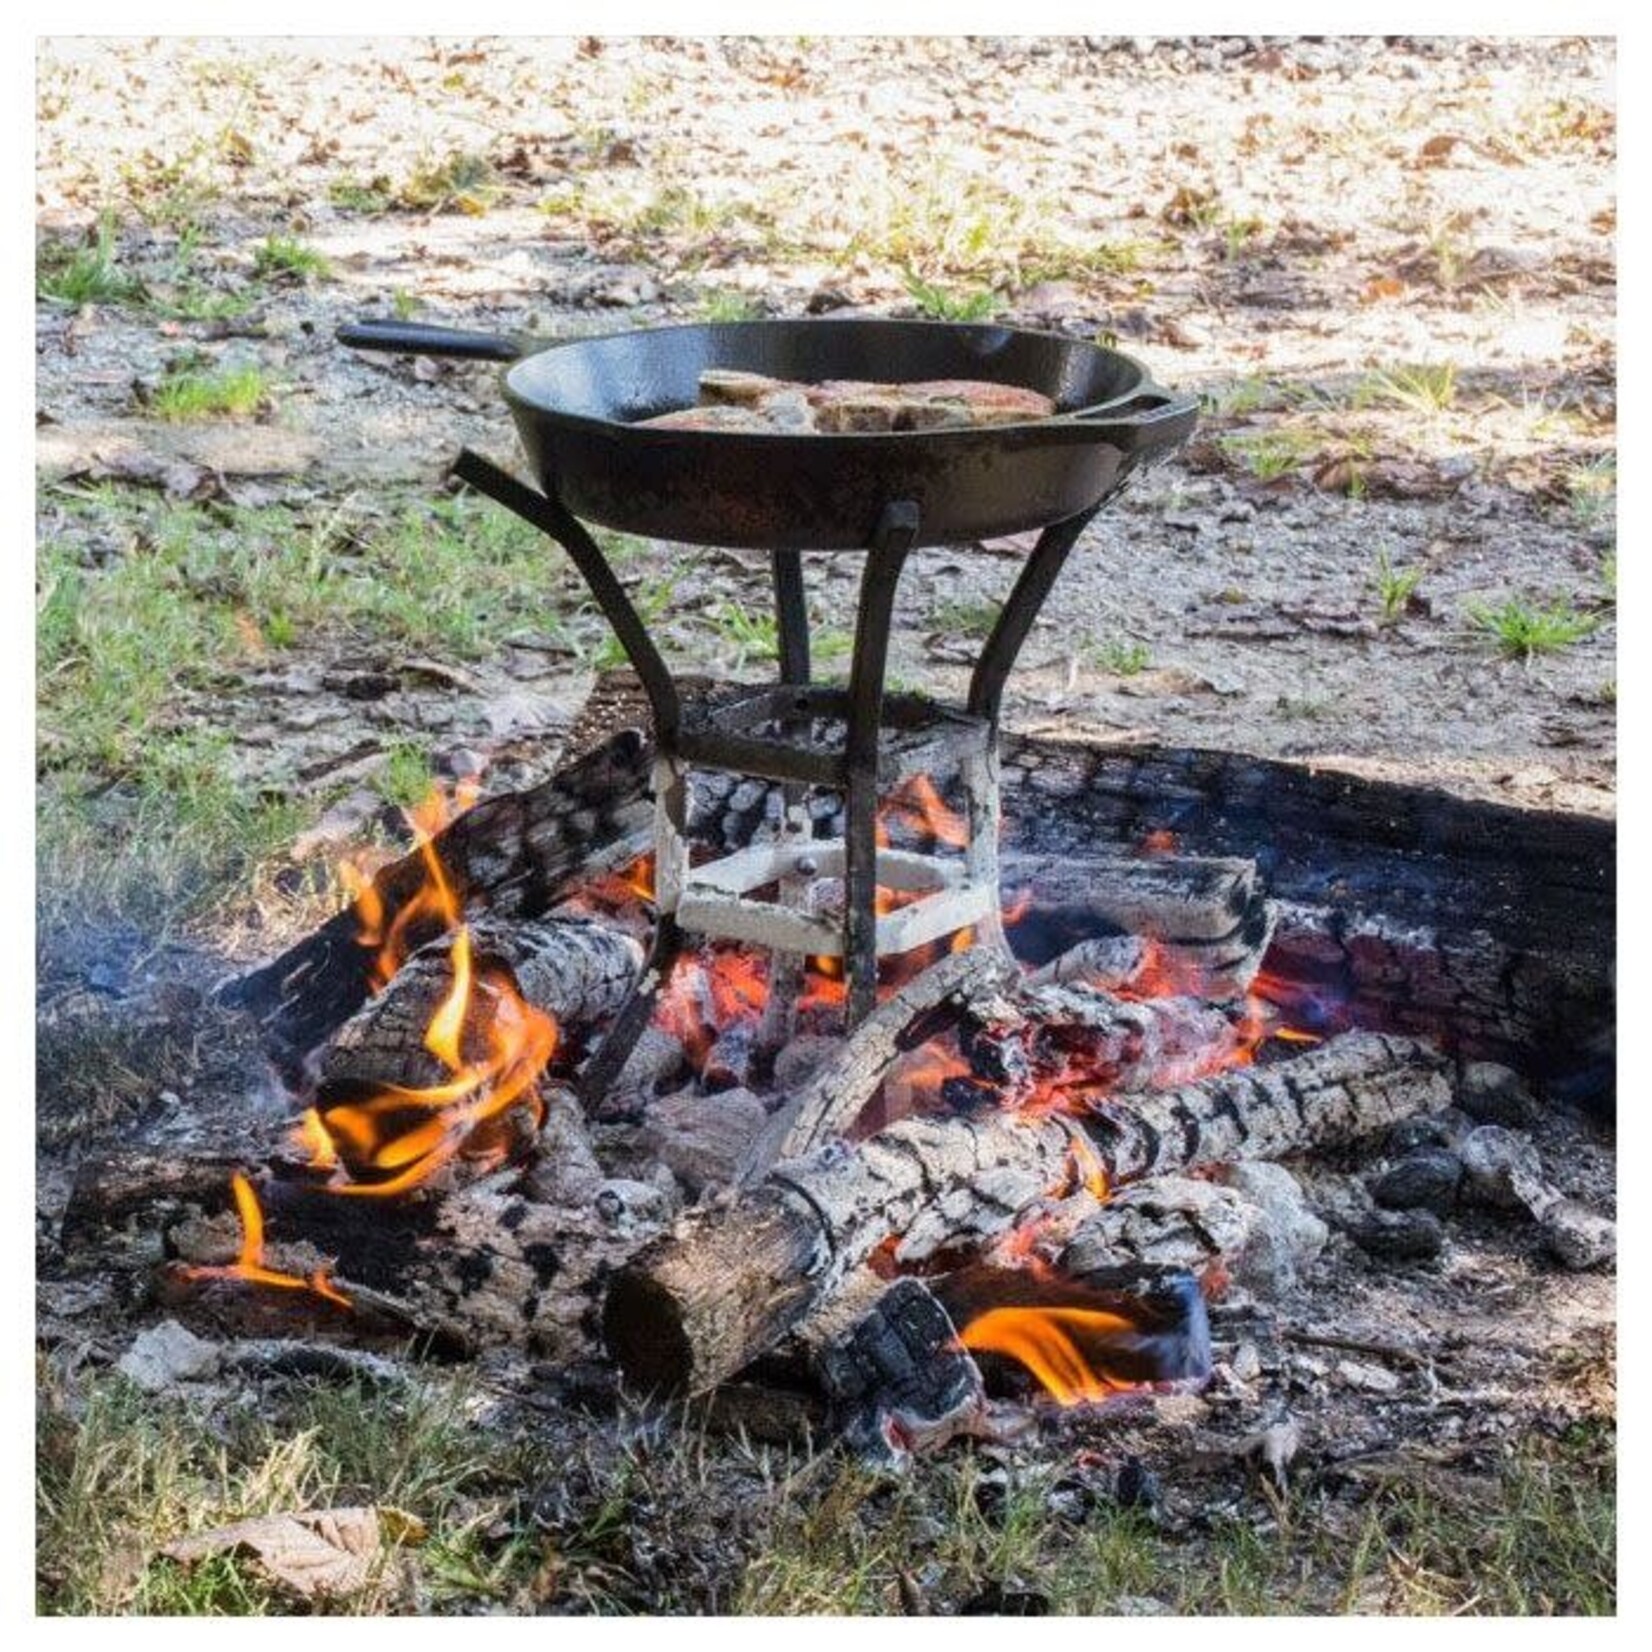 FIRE/COOK STAND